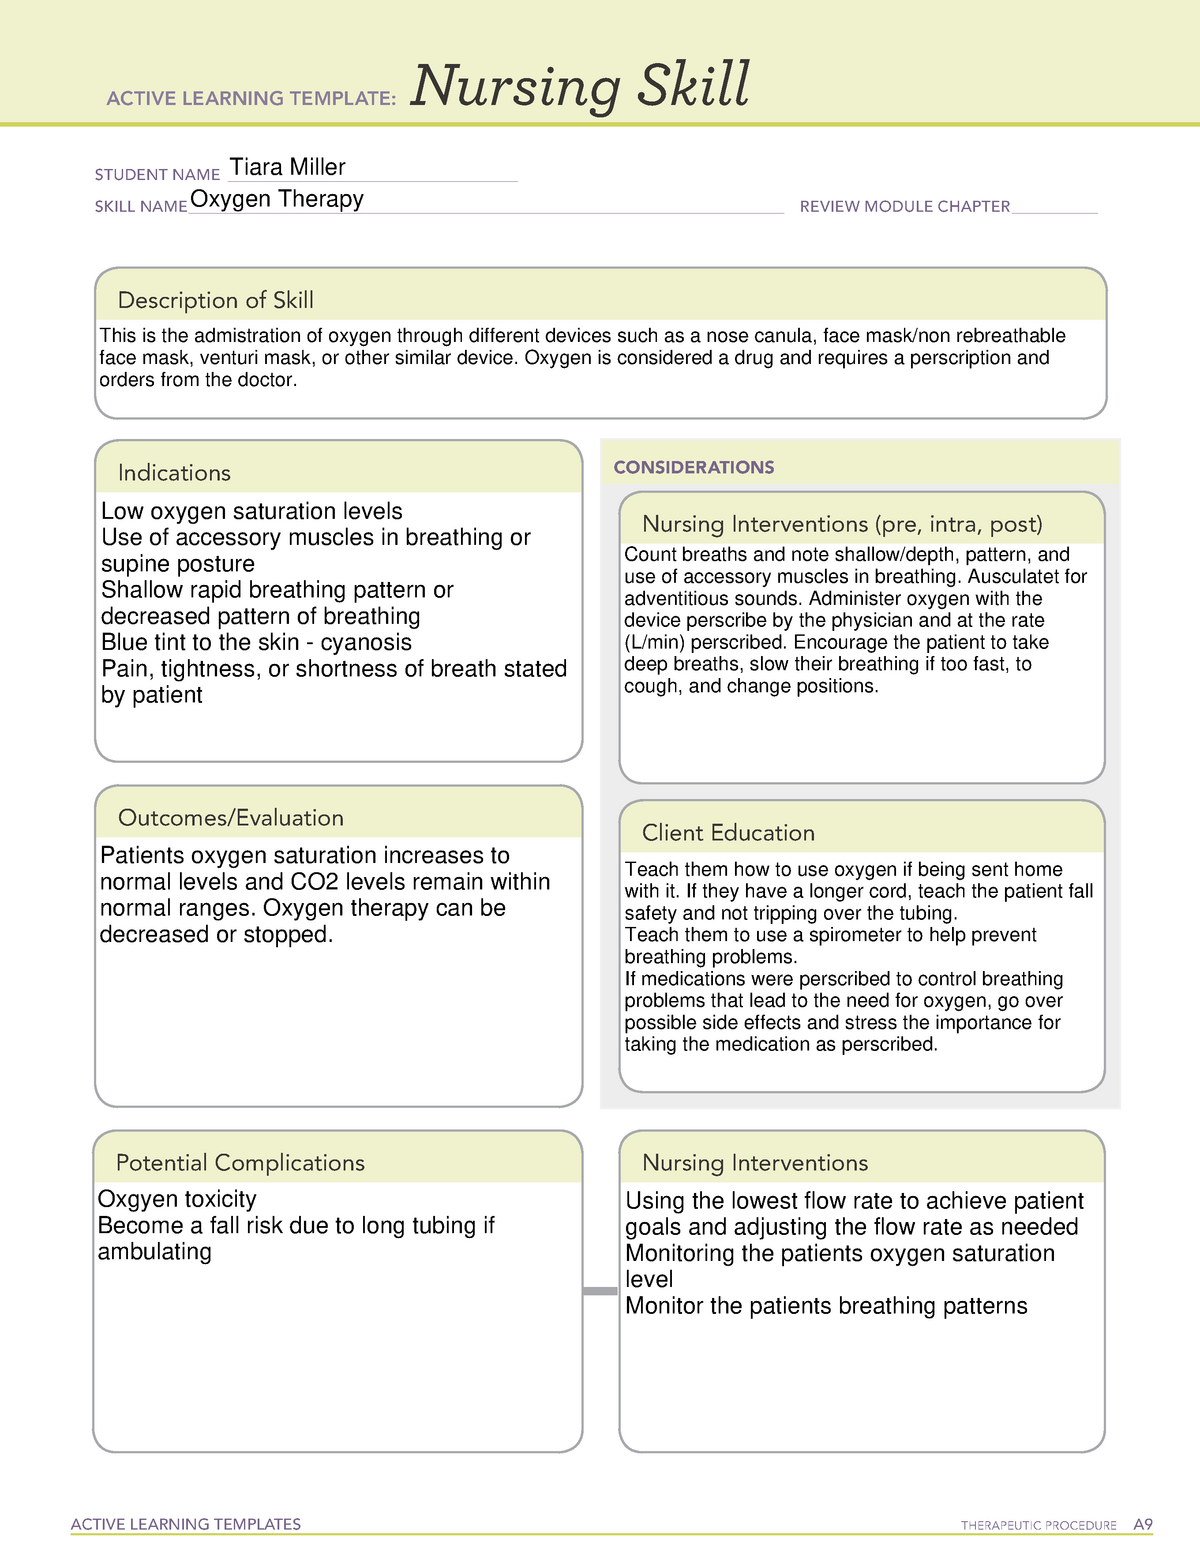 Active Learning Templates - Oxygen Therapy - ACTIVE LEARNING TEMPLATES ...